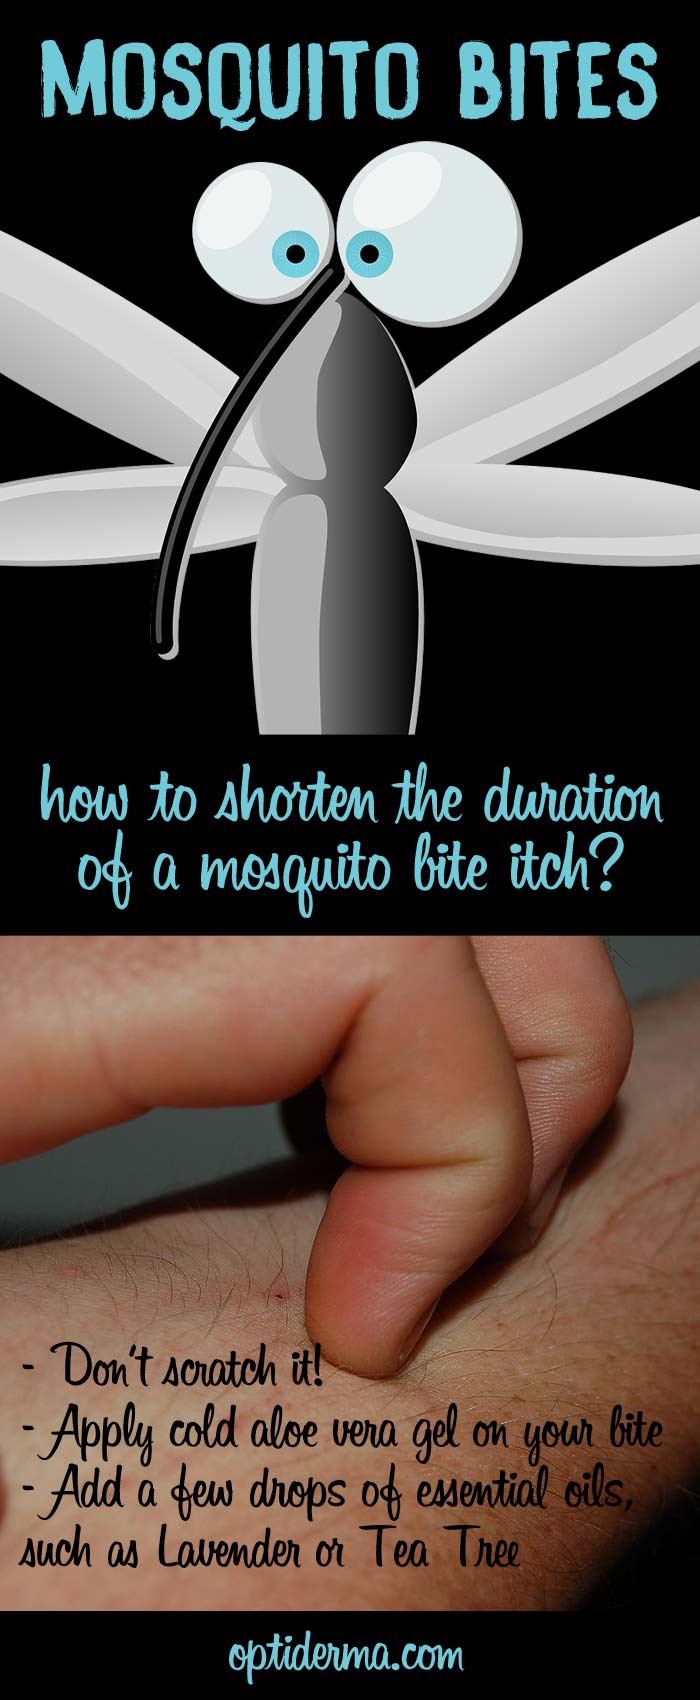 How to Shorten Mosquito Bite Itch Duration